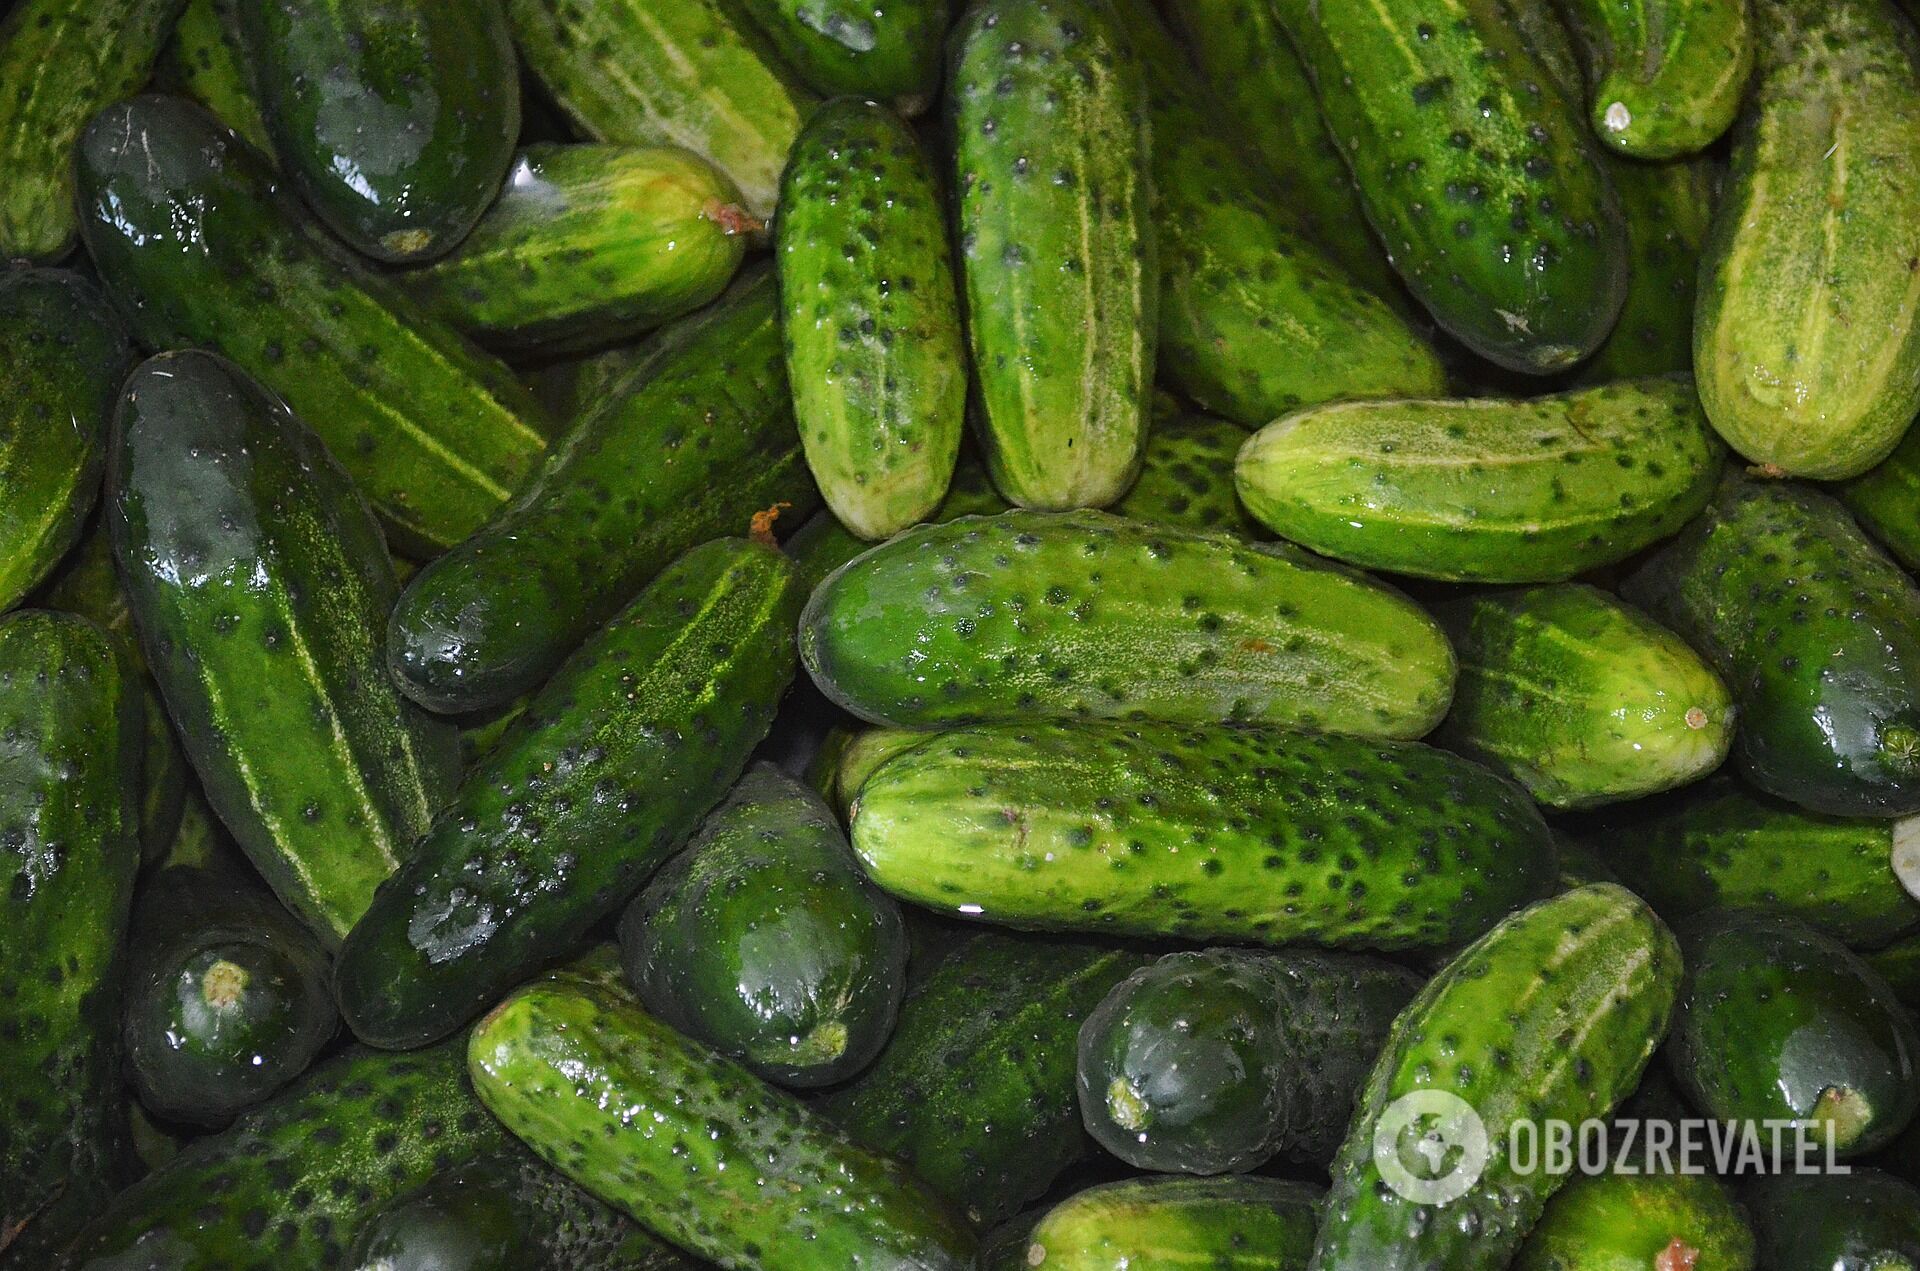 Cucumbers for pickling